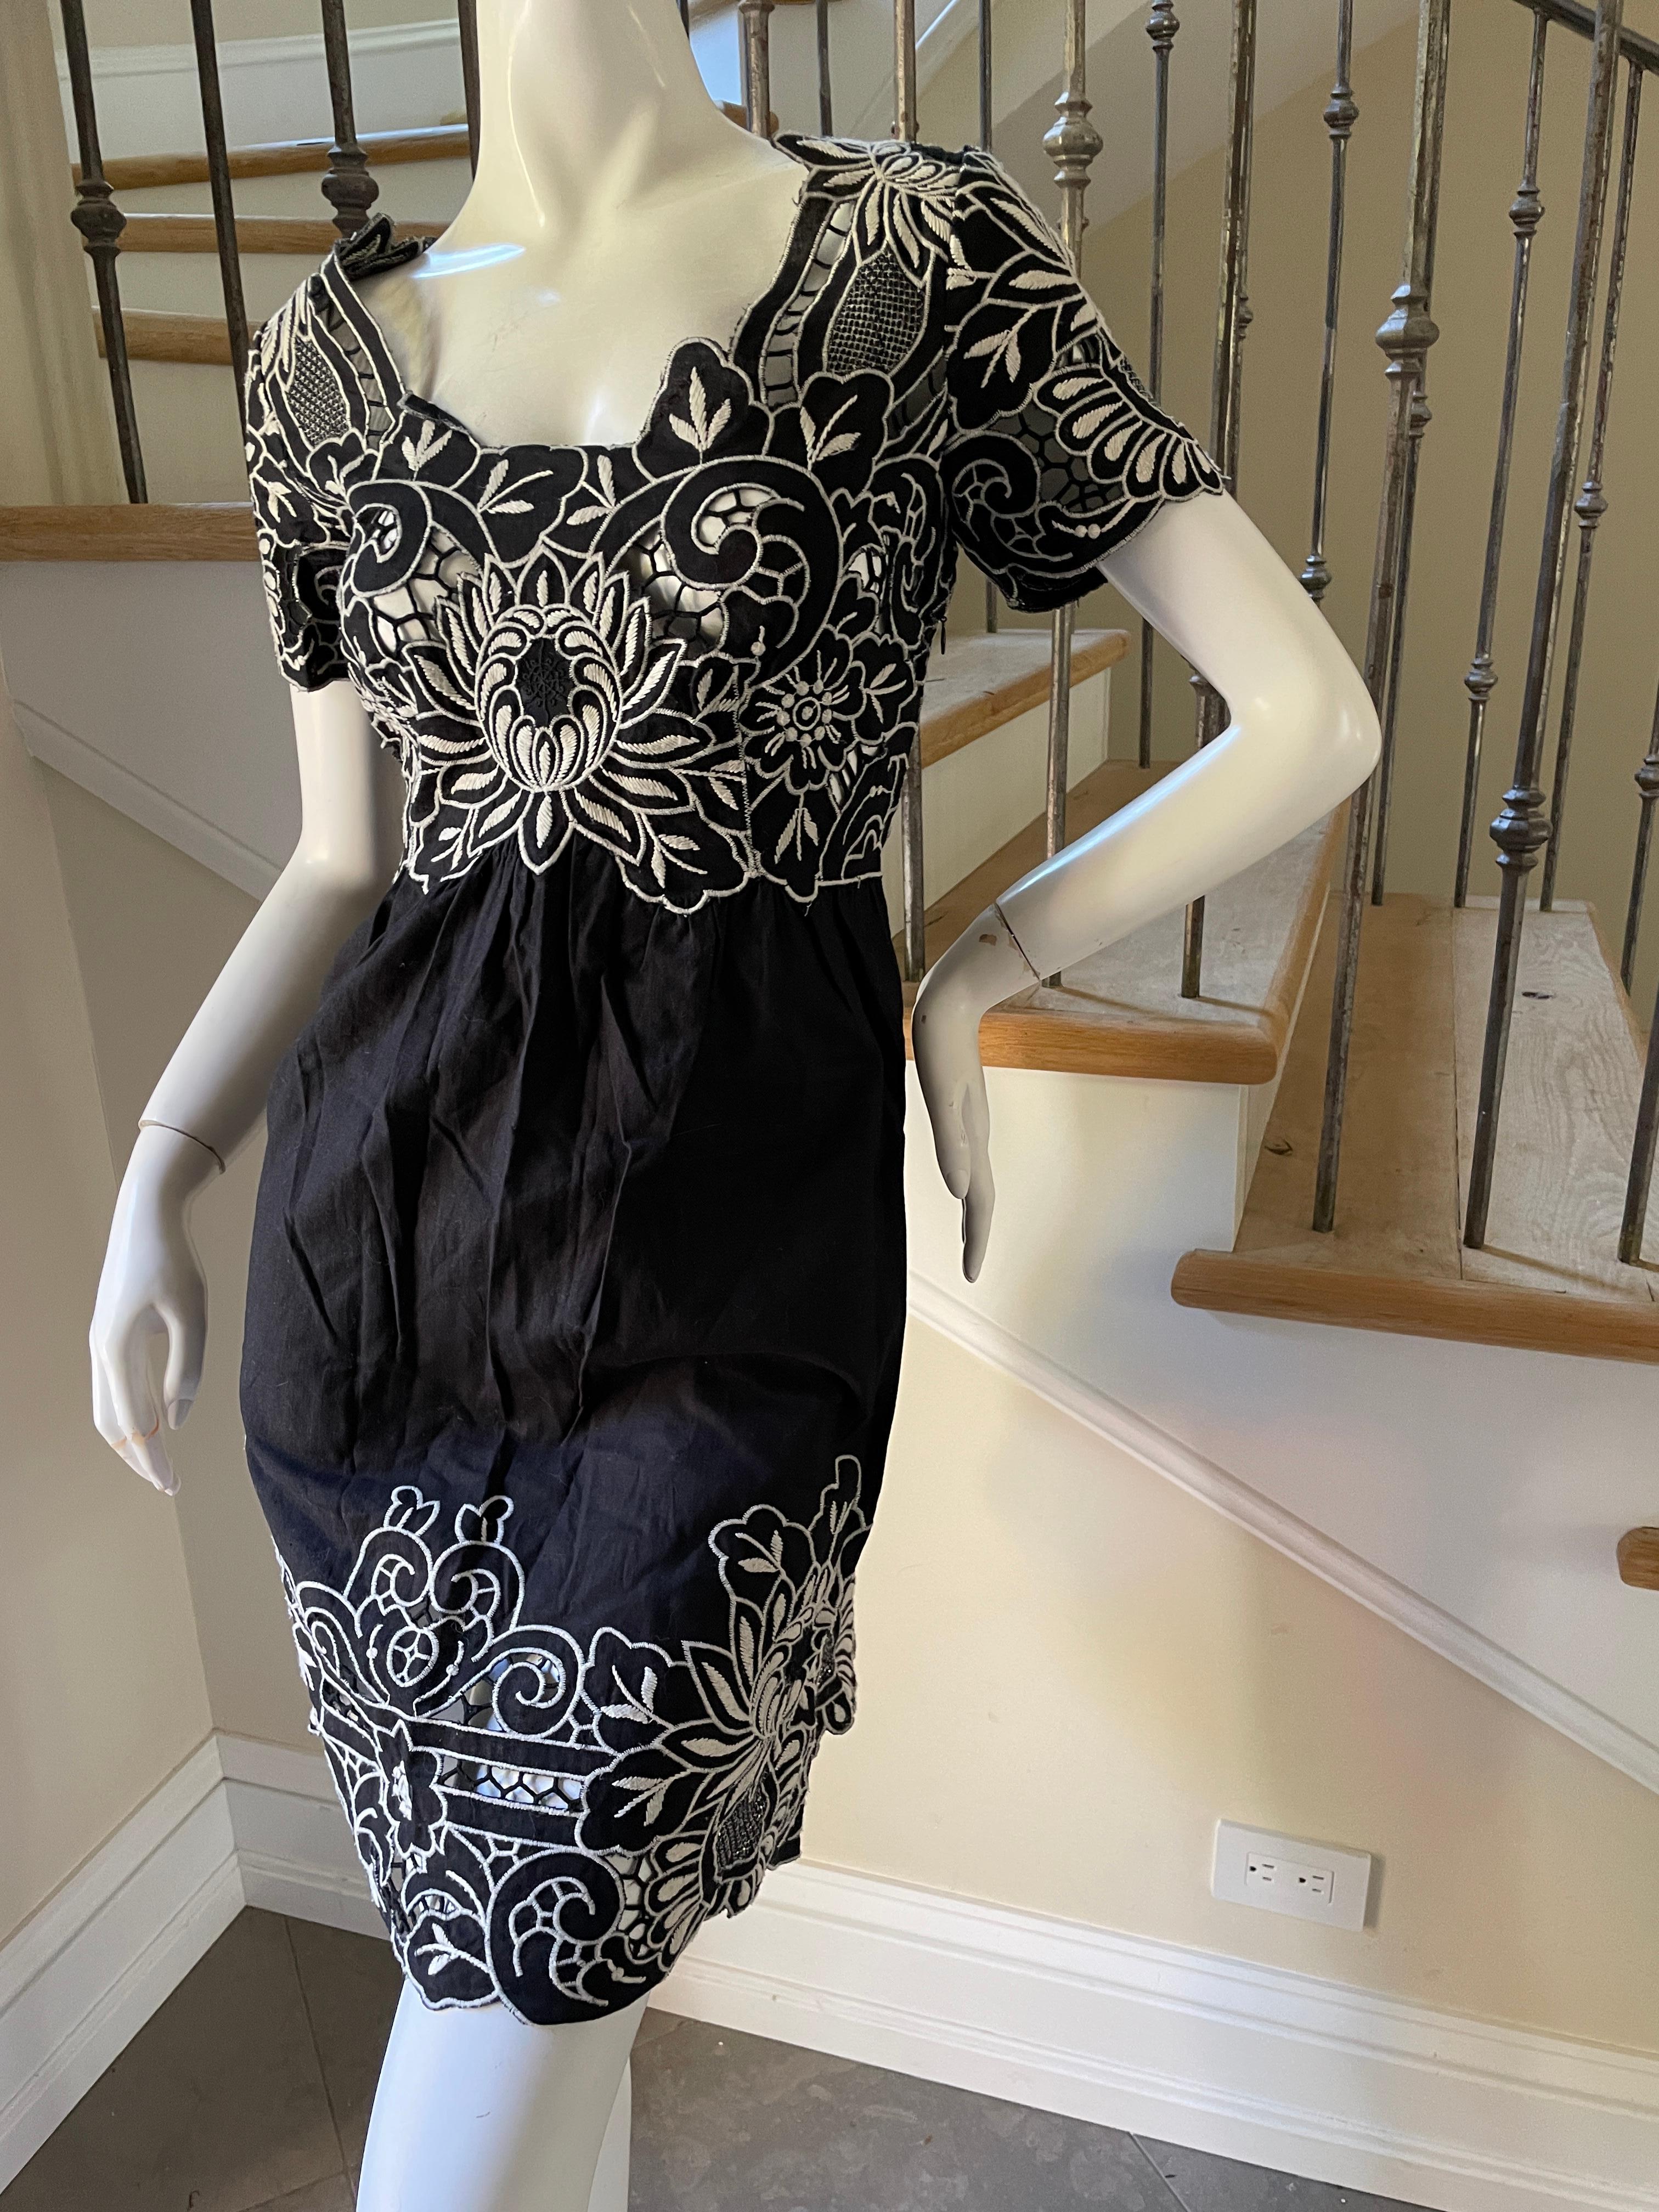 Vivienne Tam Vintage Black Linen Lotus Blossom Dress w Sheer Inserts 
This is such a charming piece.
Size M
Bust  36